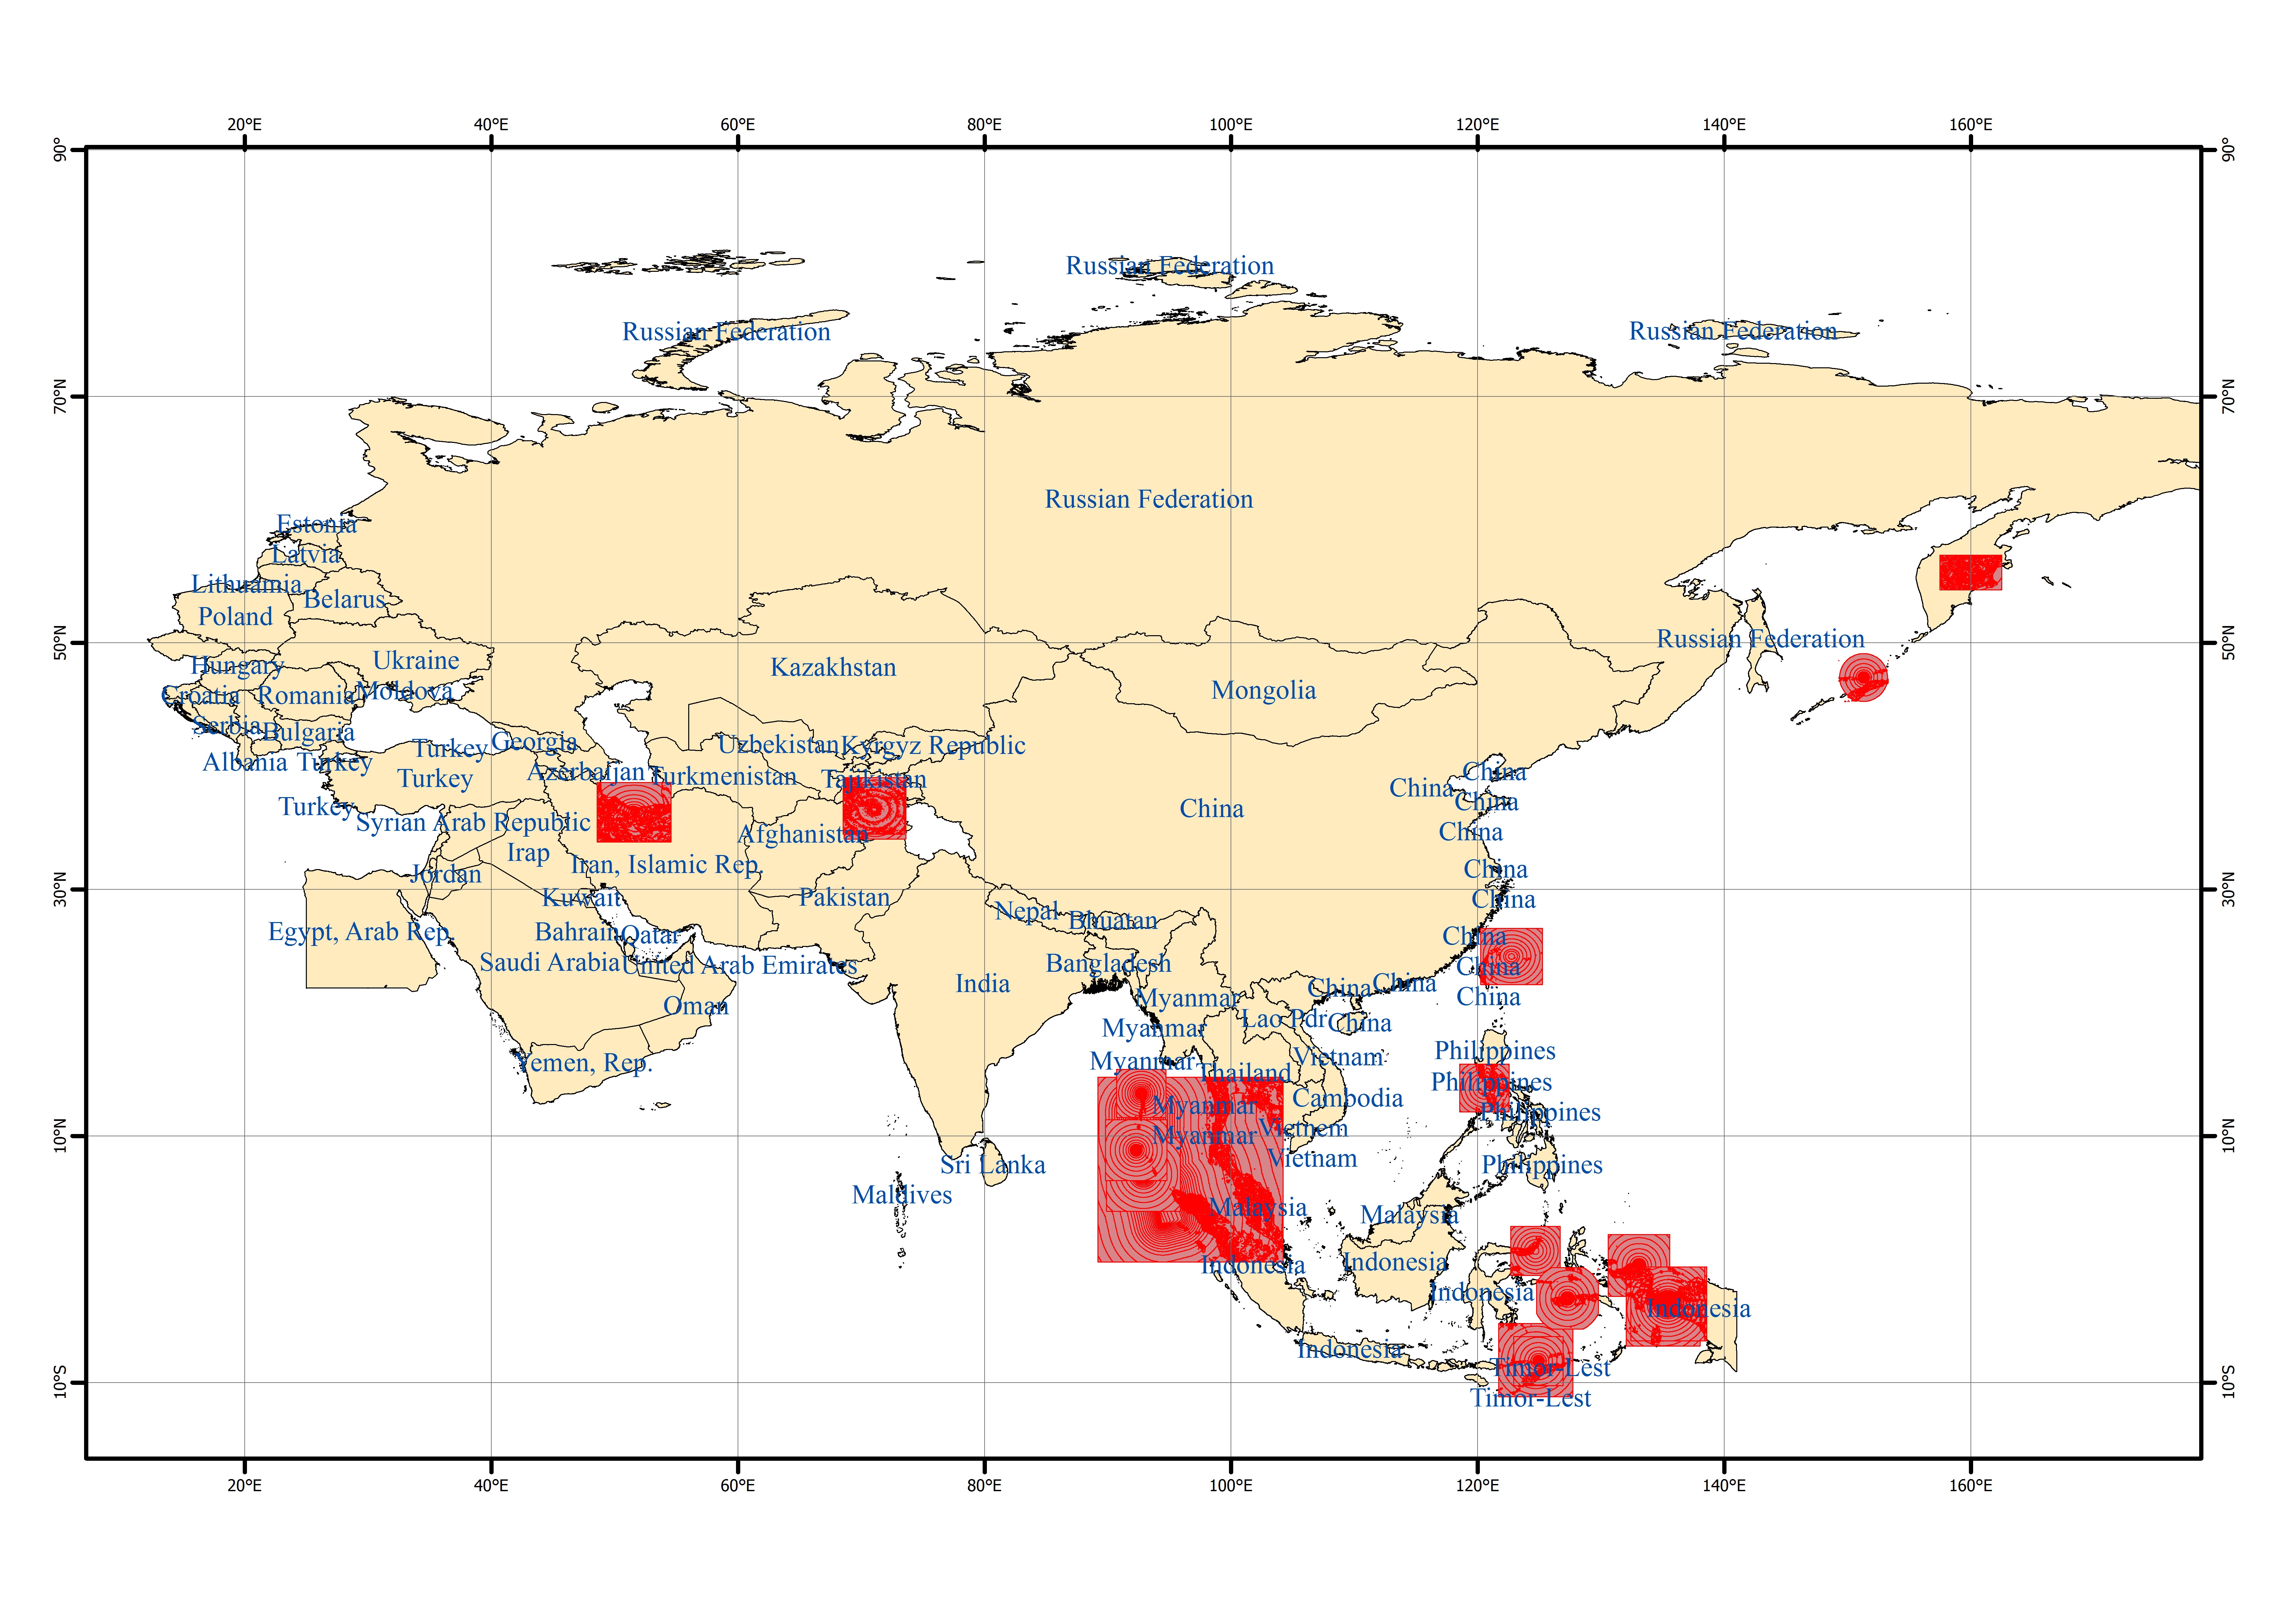 Spatio-temporal Distribution of Earthquake Disaster in the Belt and Road Area of 2004